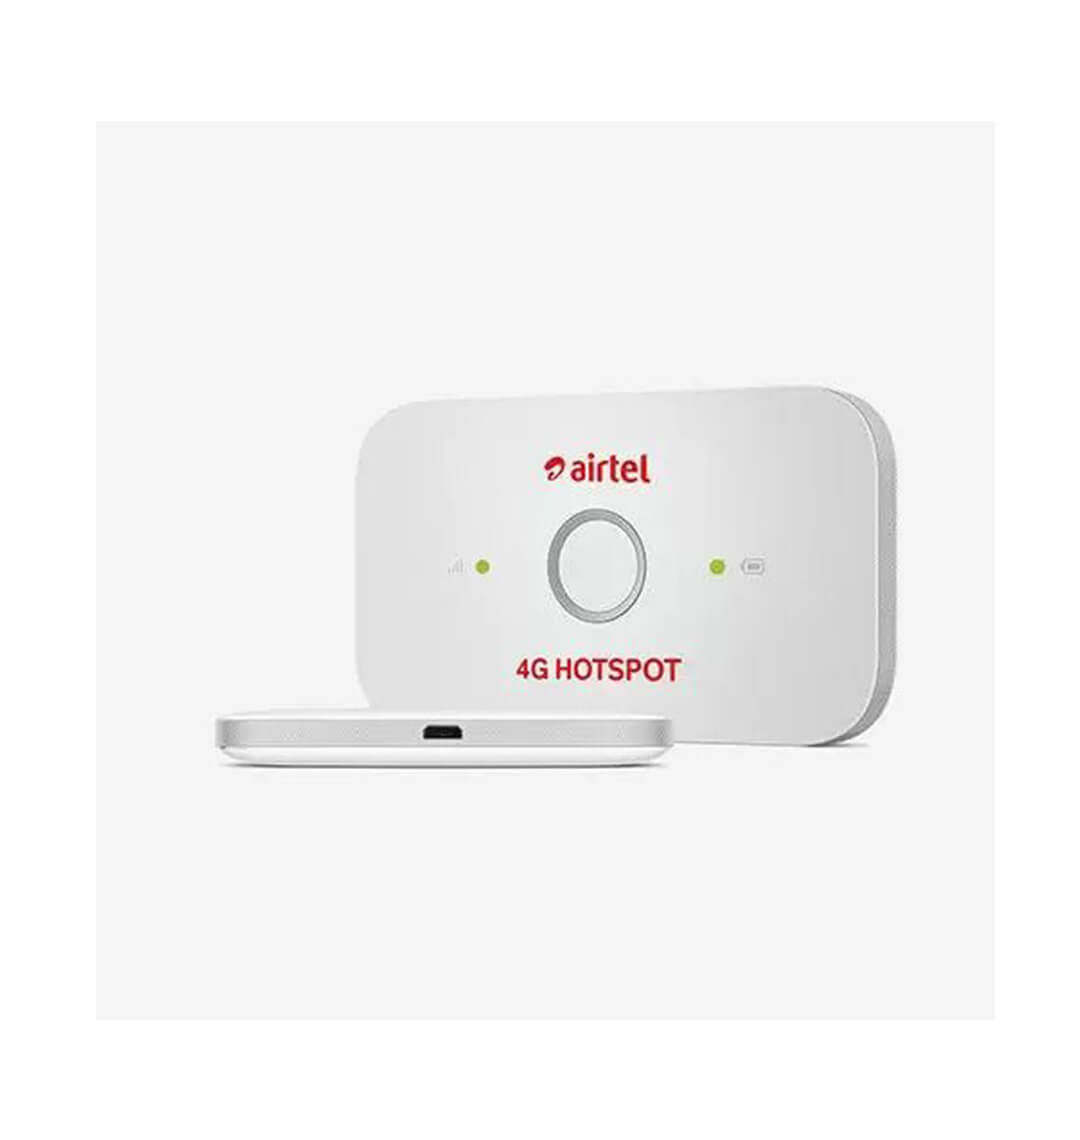 Mobile 4G Router E5573 Any Sim Support